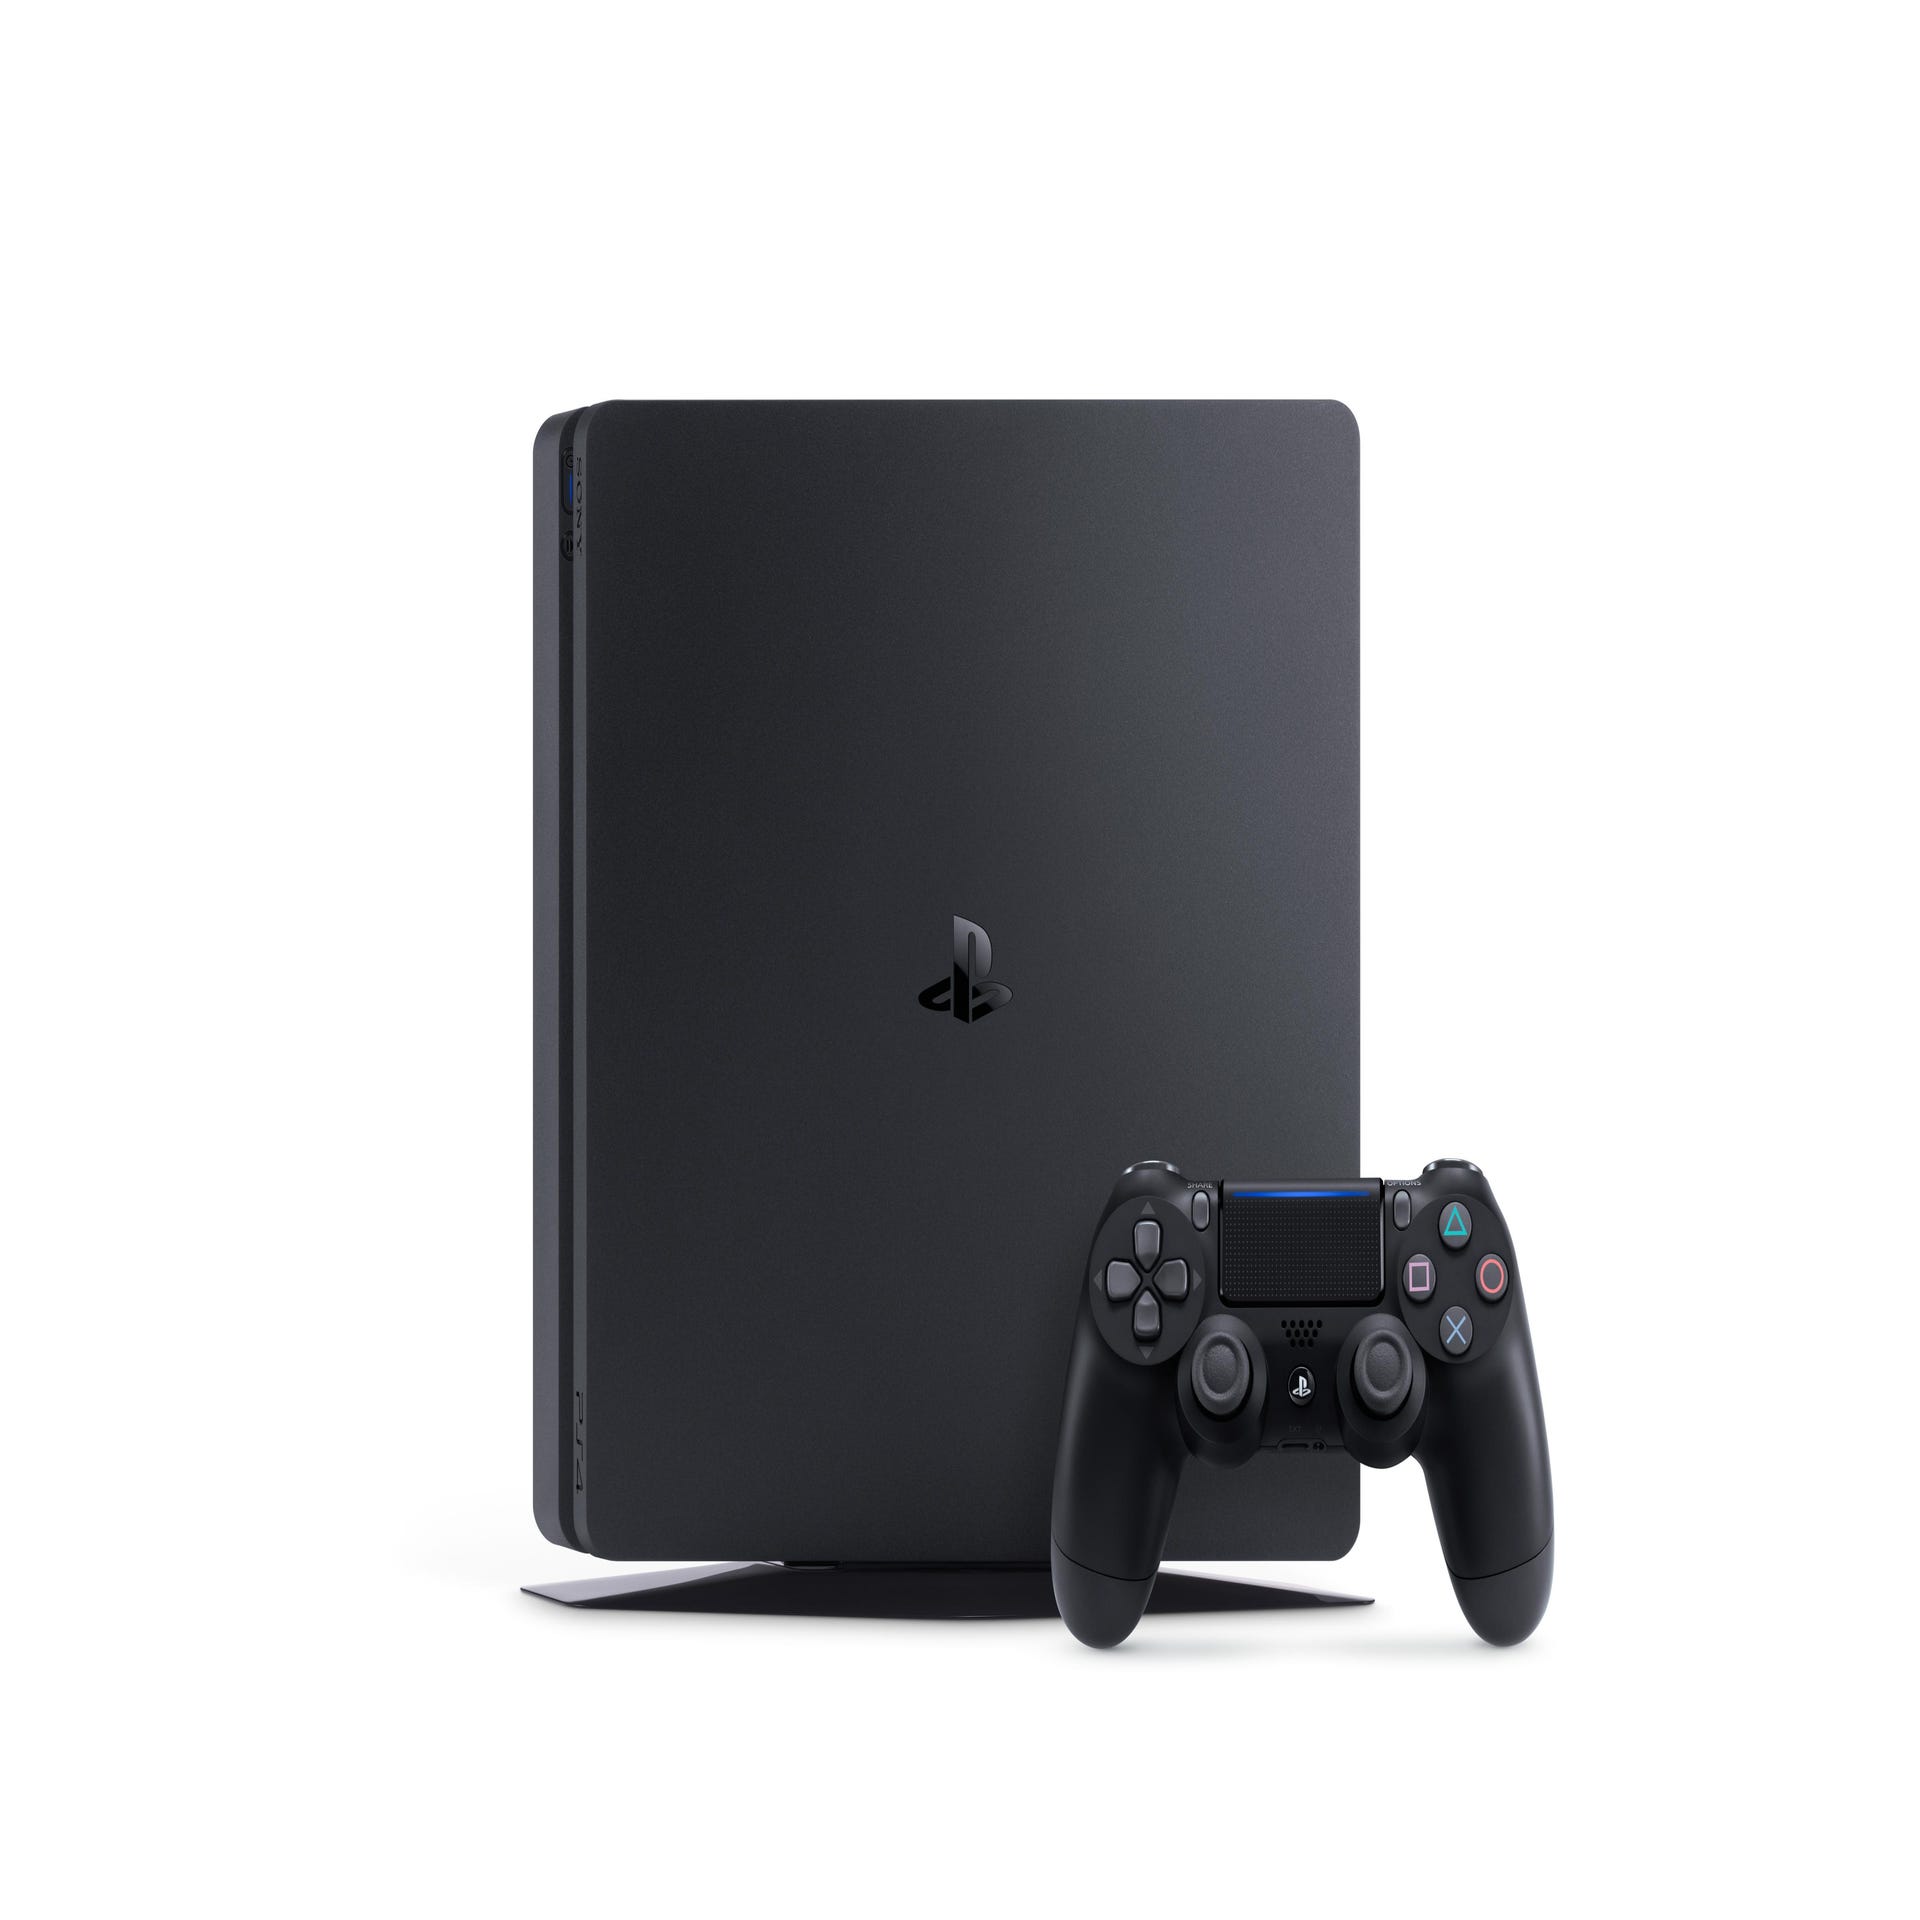 The PS4 Slim is coming September 15 for $299